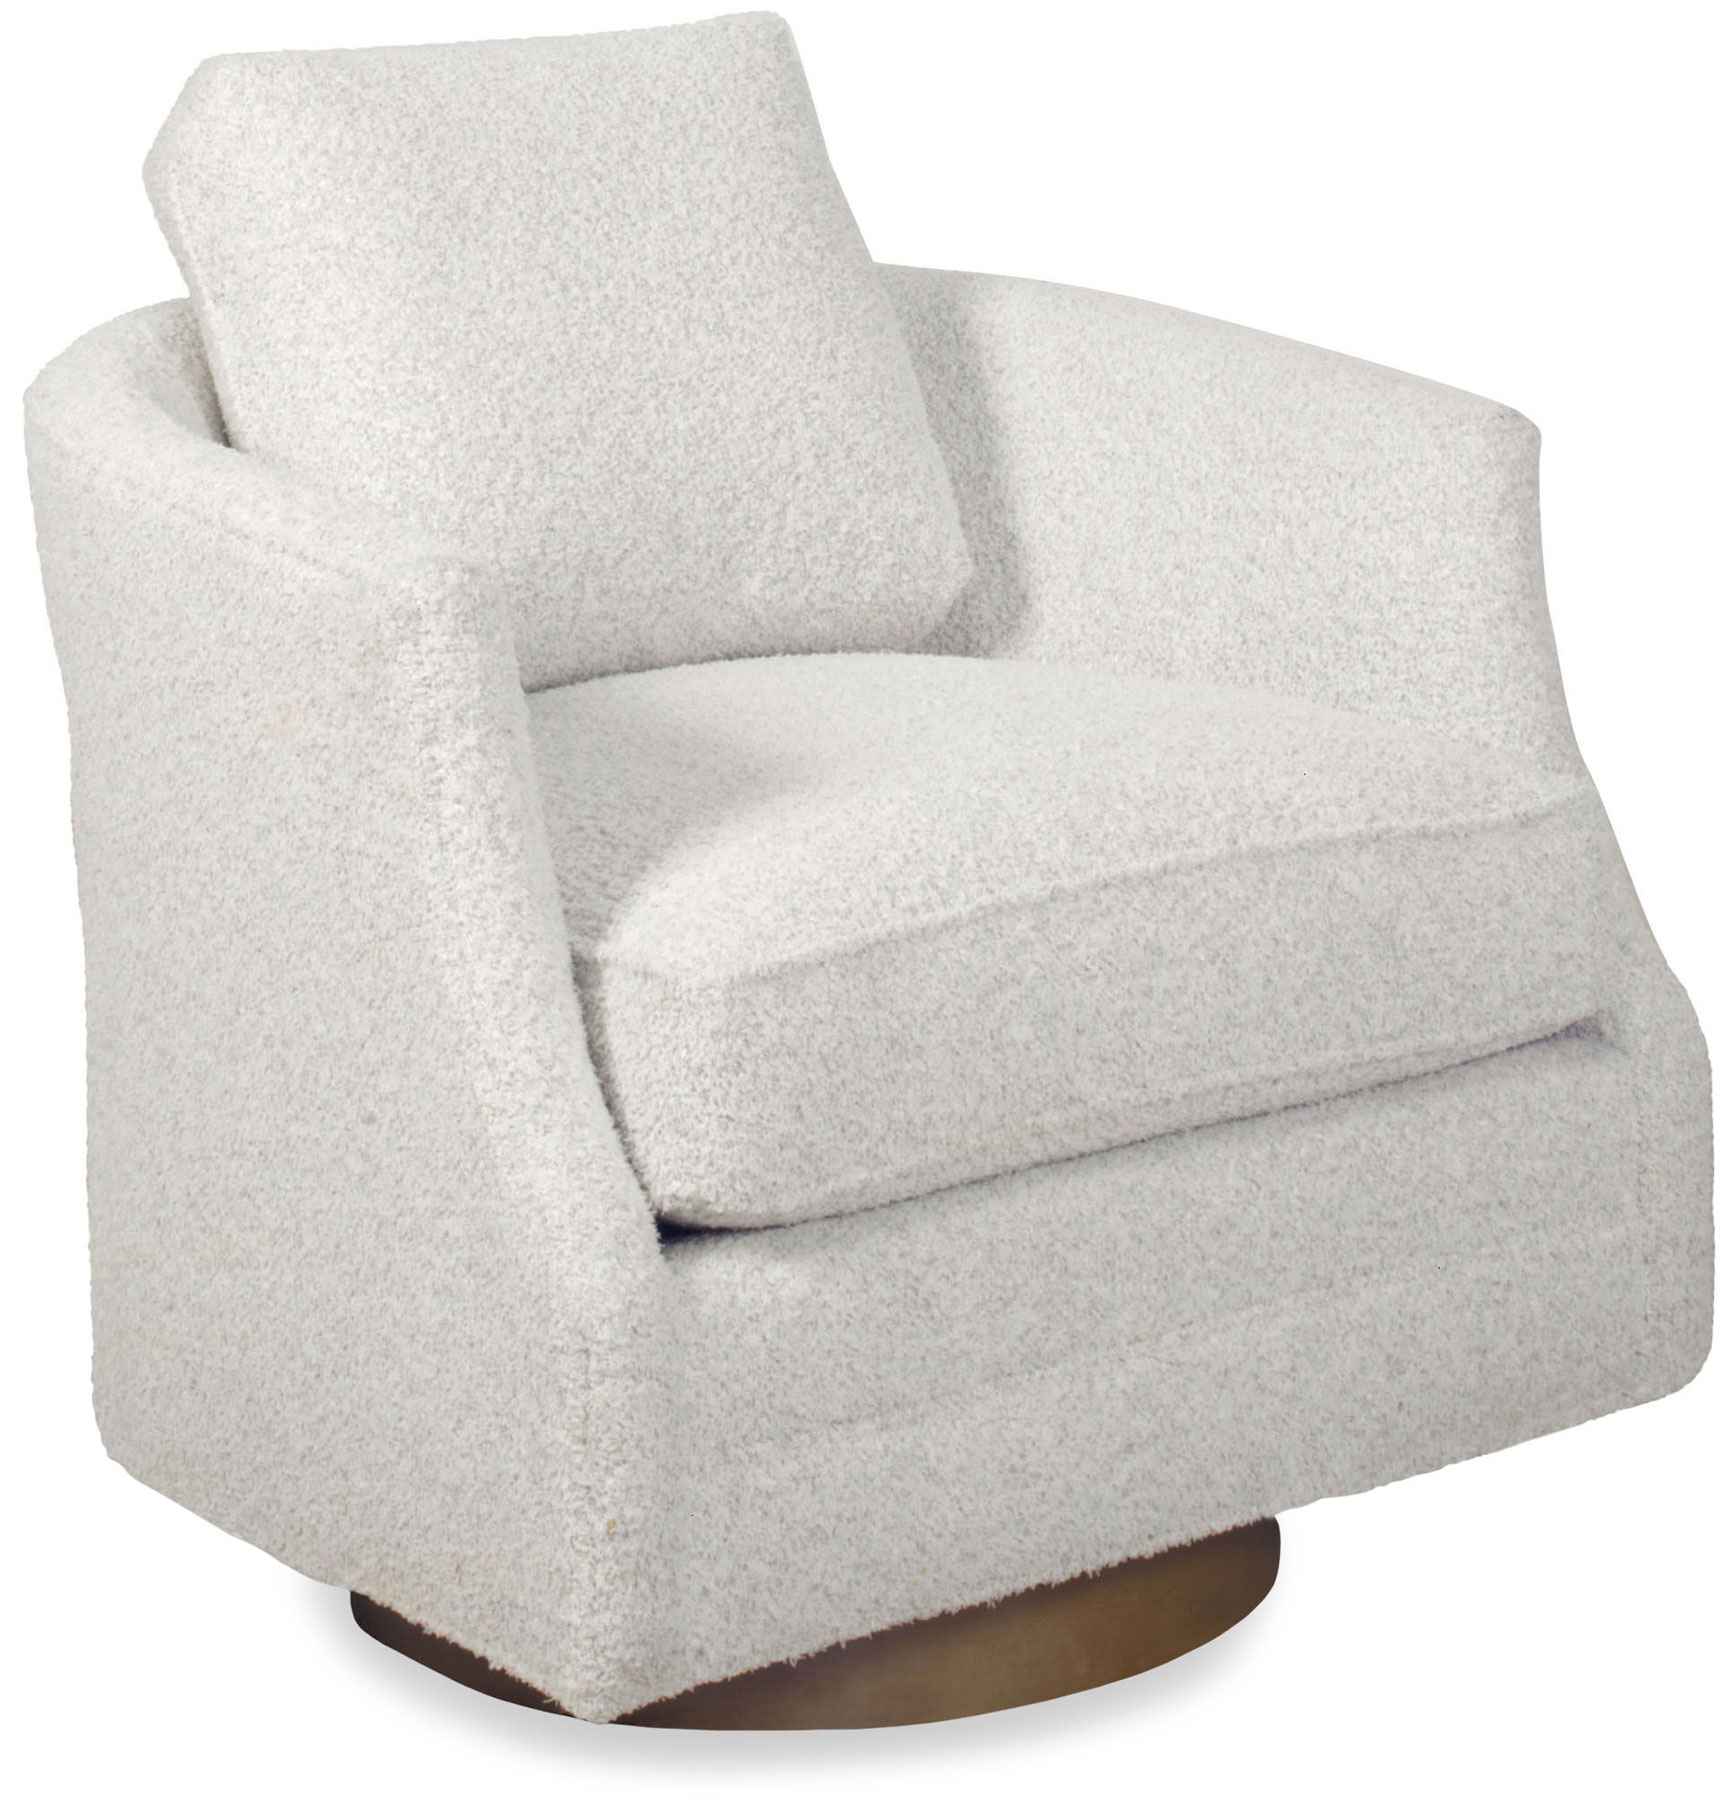 Temple Furniture 22985-S Audrey Swivel Chair